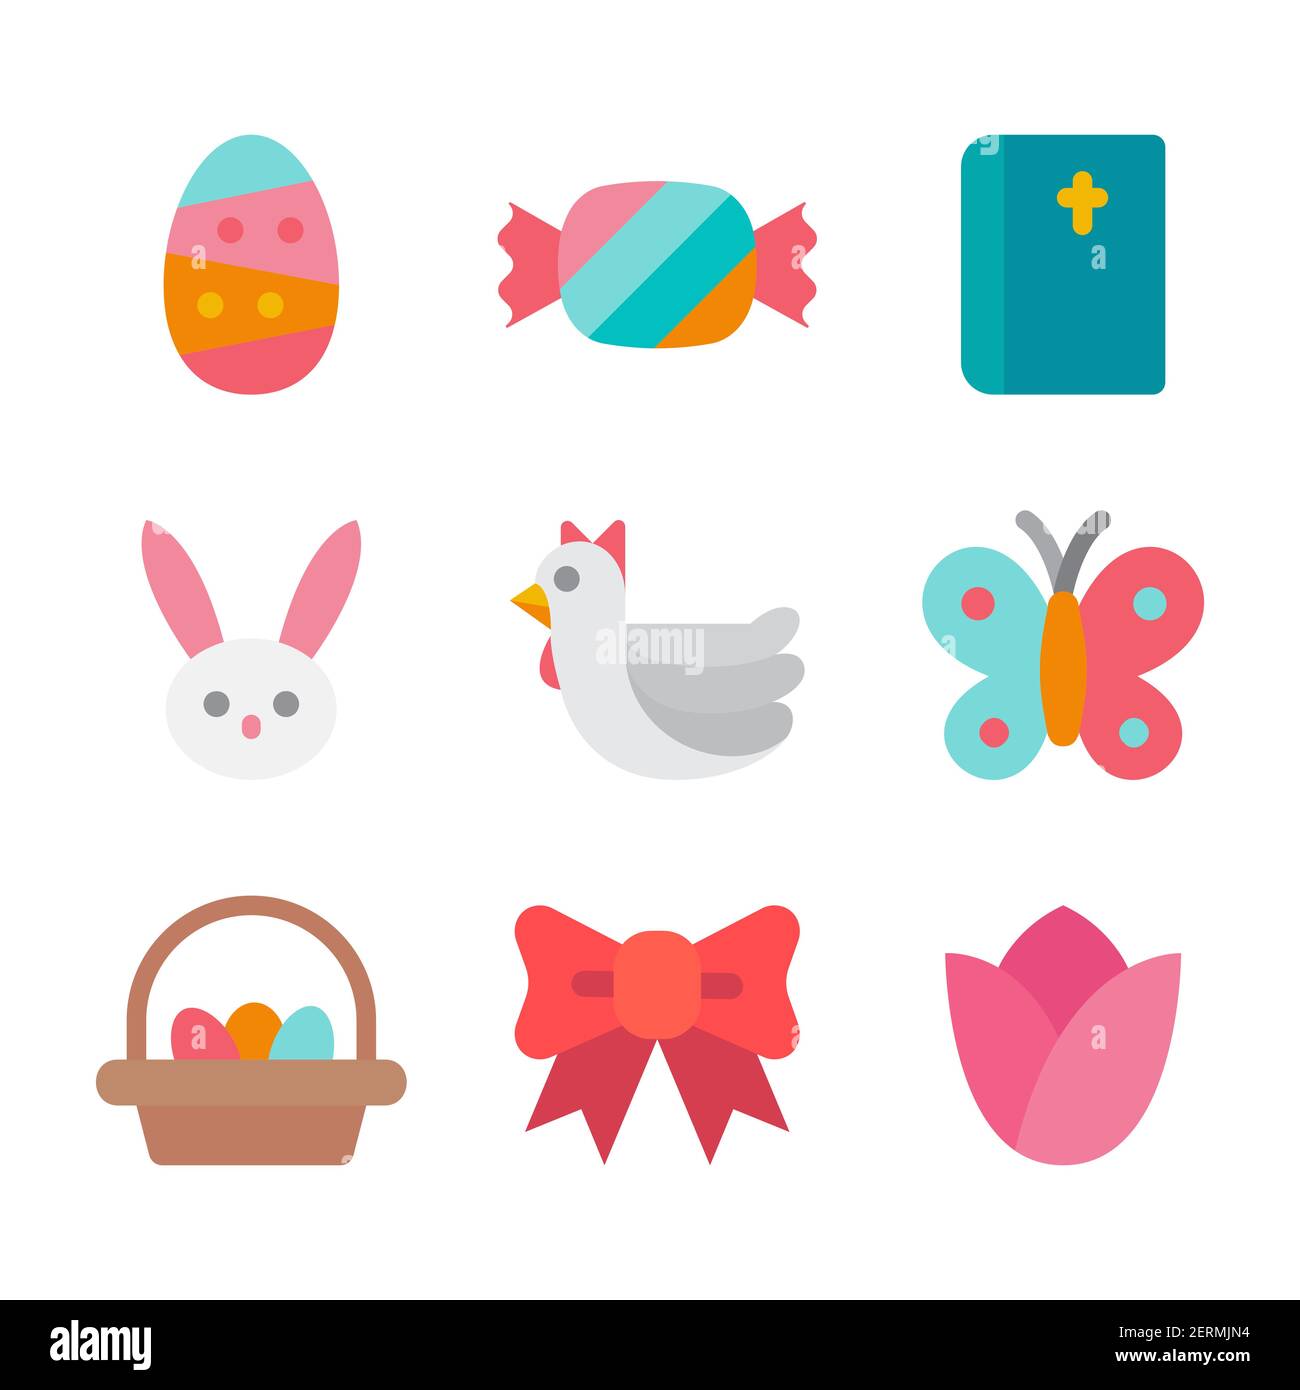 Happy easter icon set. Flat design style. Stock Vector